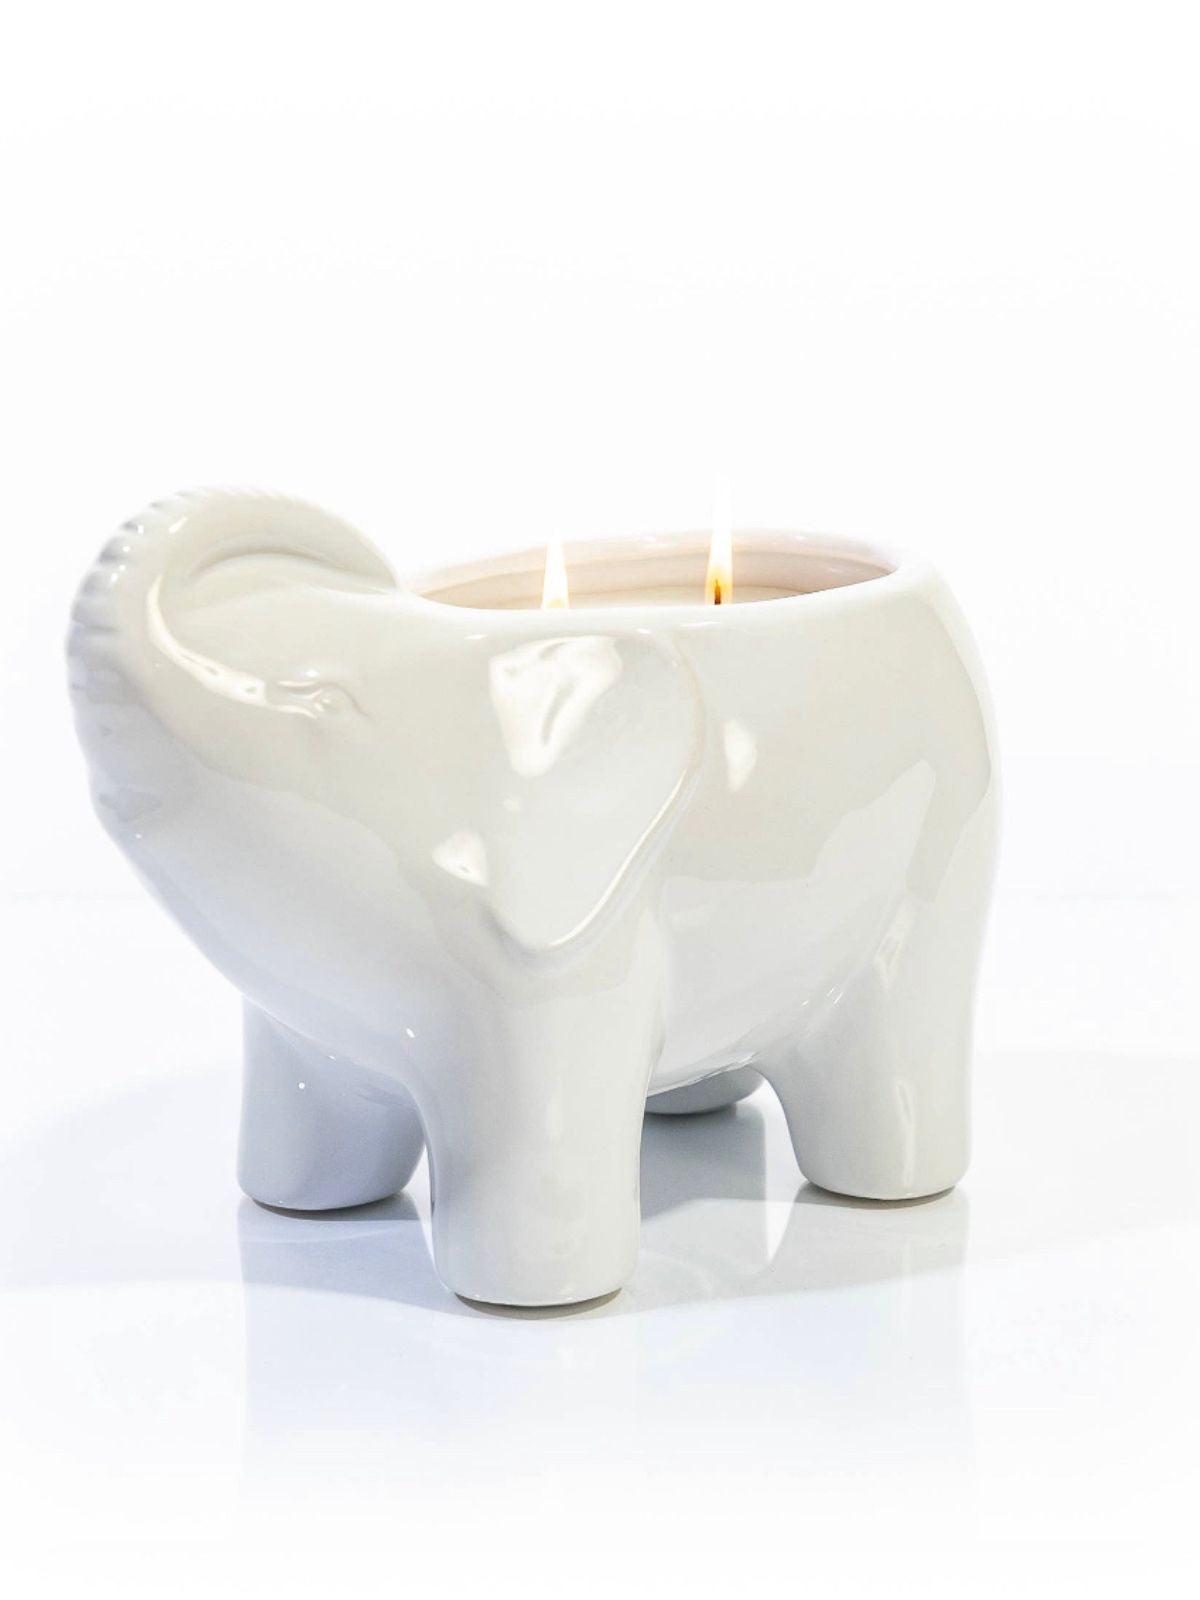 This elegant white elephant candle is designed and finished by hand sculpting the ceramic of each vessel. These candles are then hand filled with a proprietary soy wax blend, all natural essential oils, and 2 cotton wicks to provide a clean burn.  